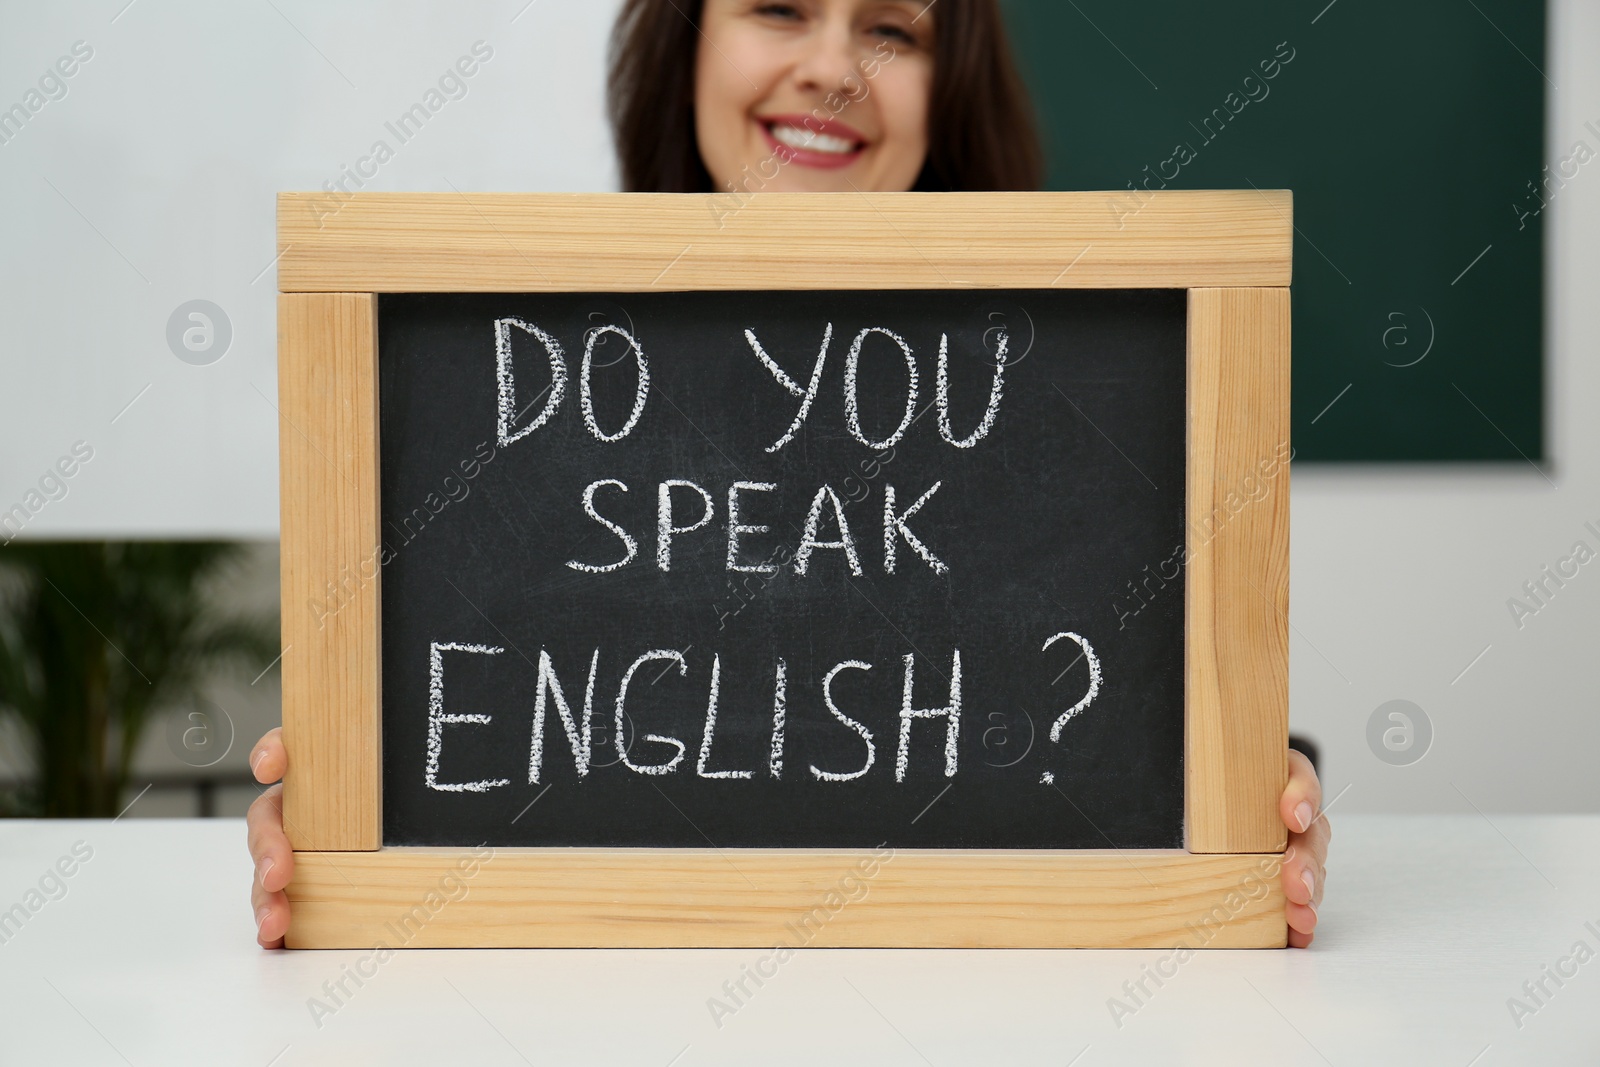 Photo of Teacher holding small chalkboard with inscription Do You Speak English? at table in classroom